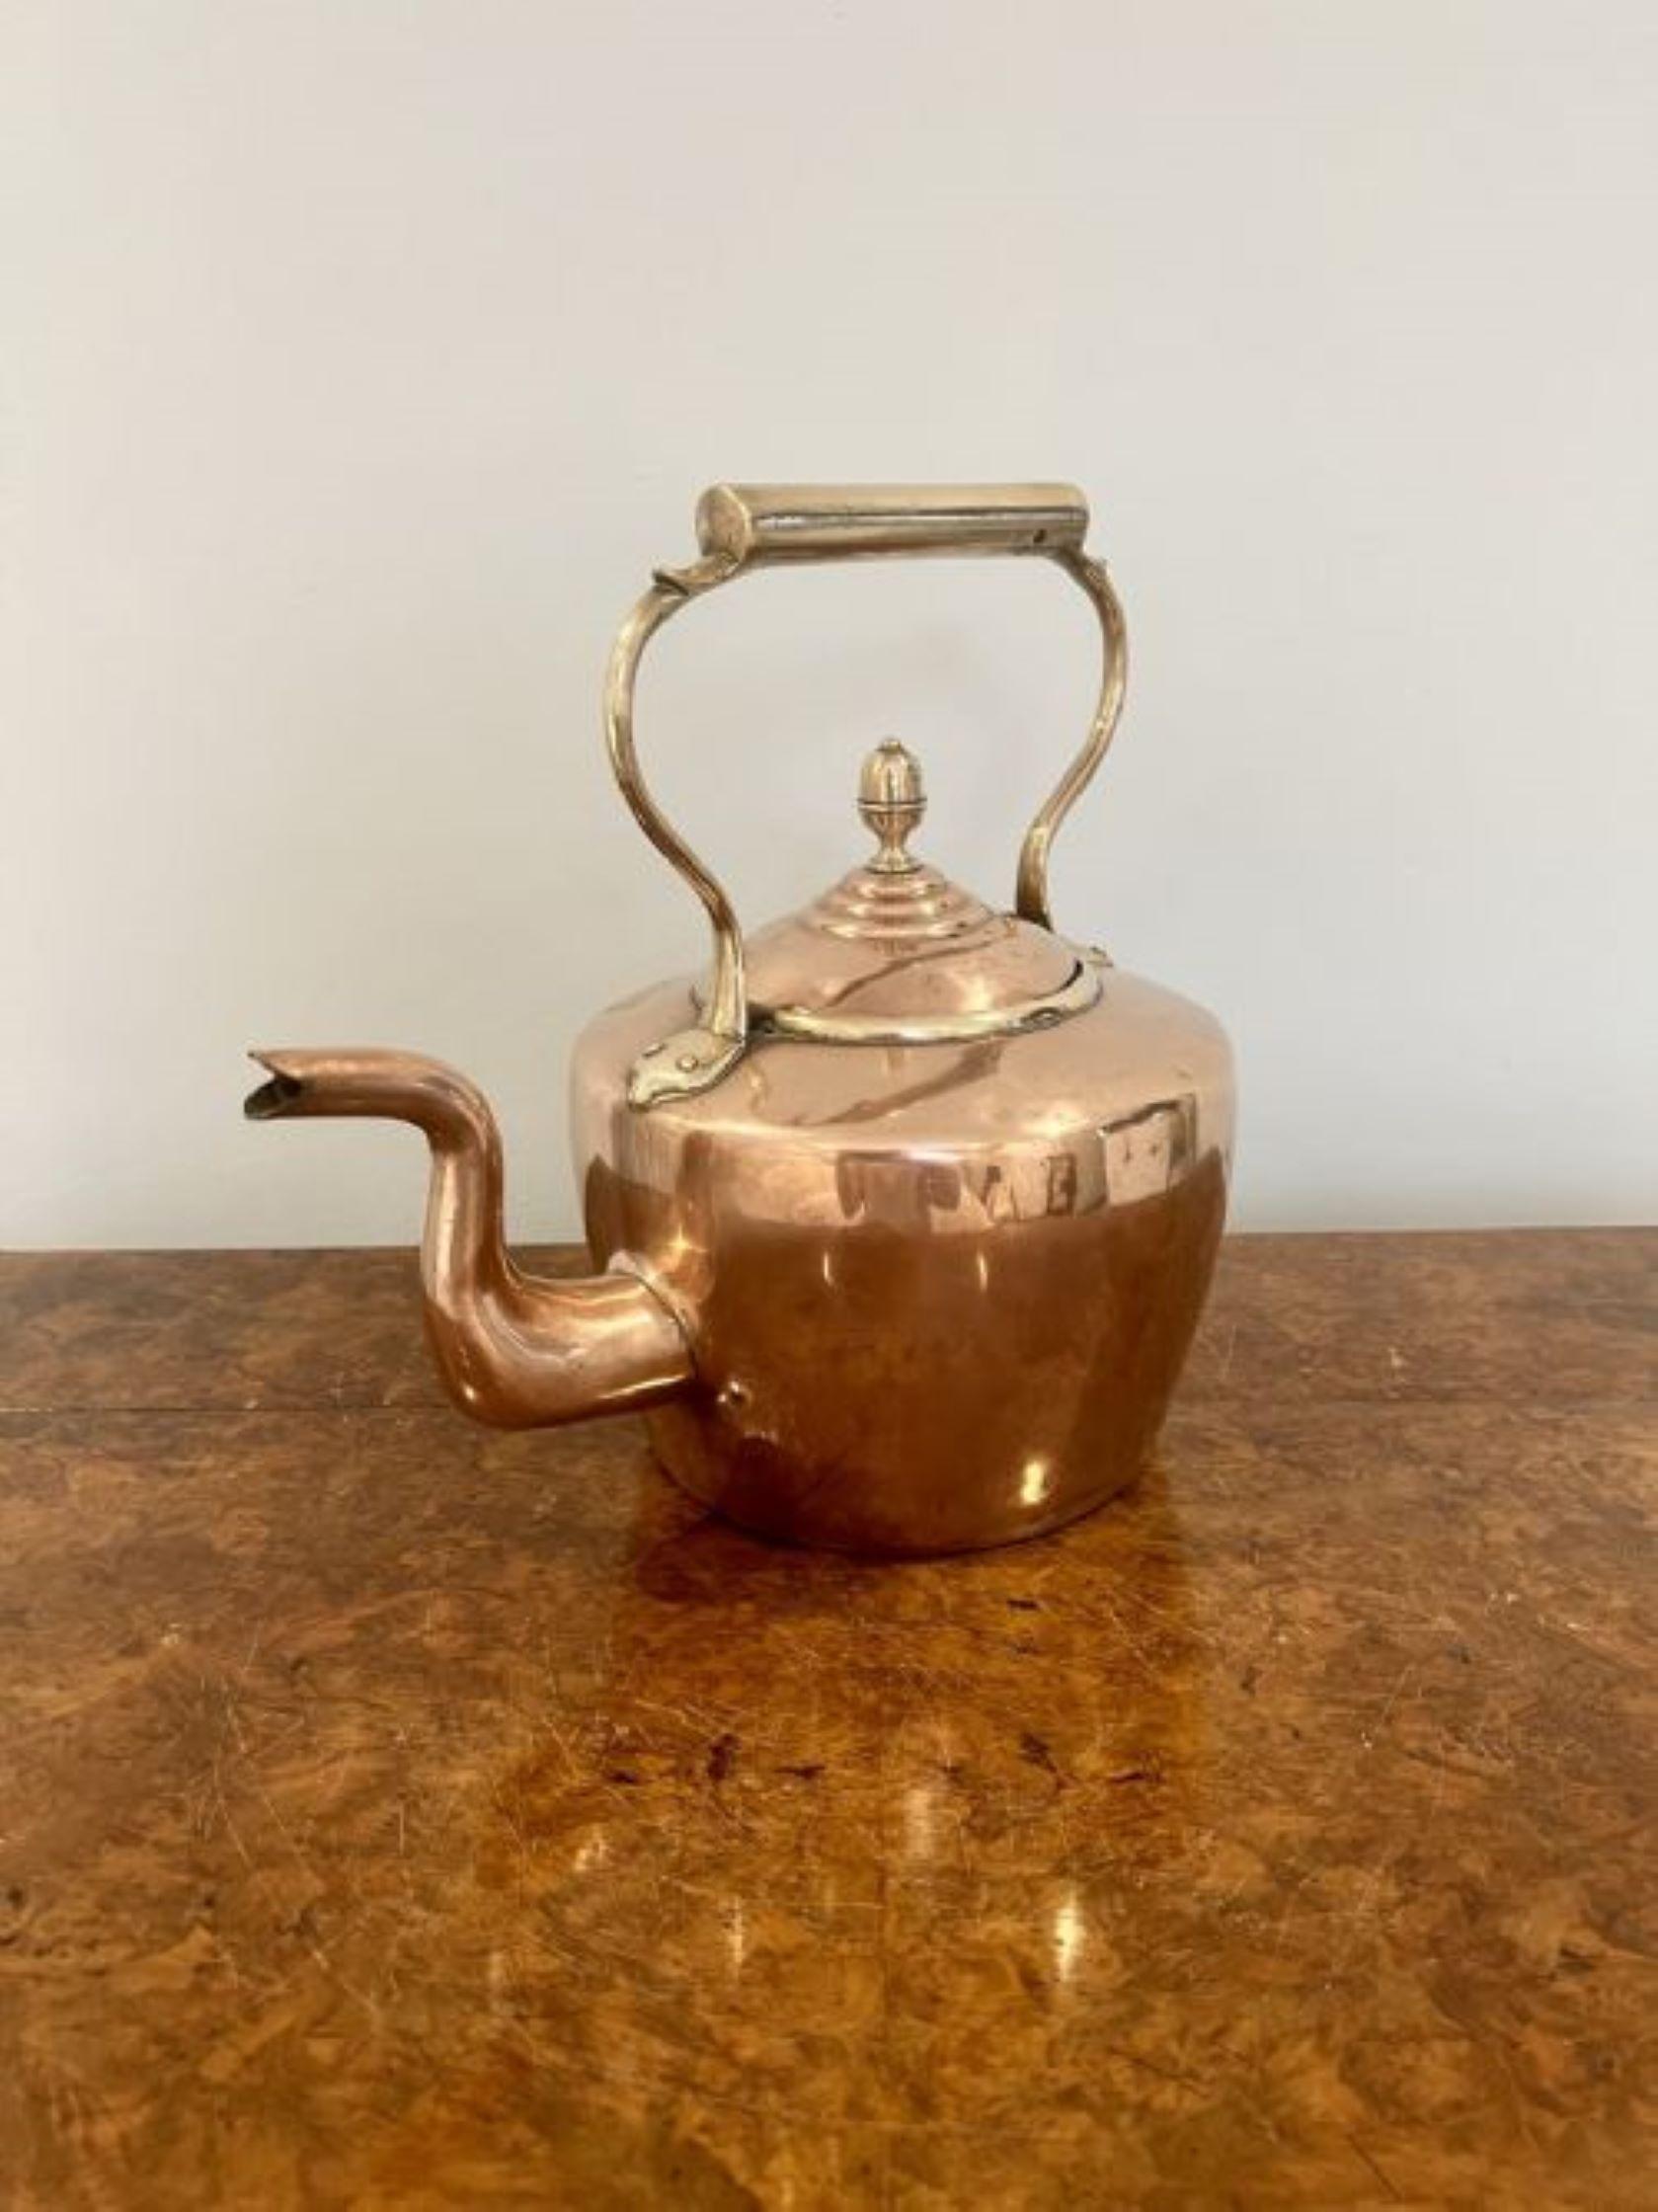 Large antique George III copper kettle having a shaped handle and spout, lift off lid with the original original brass knob.